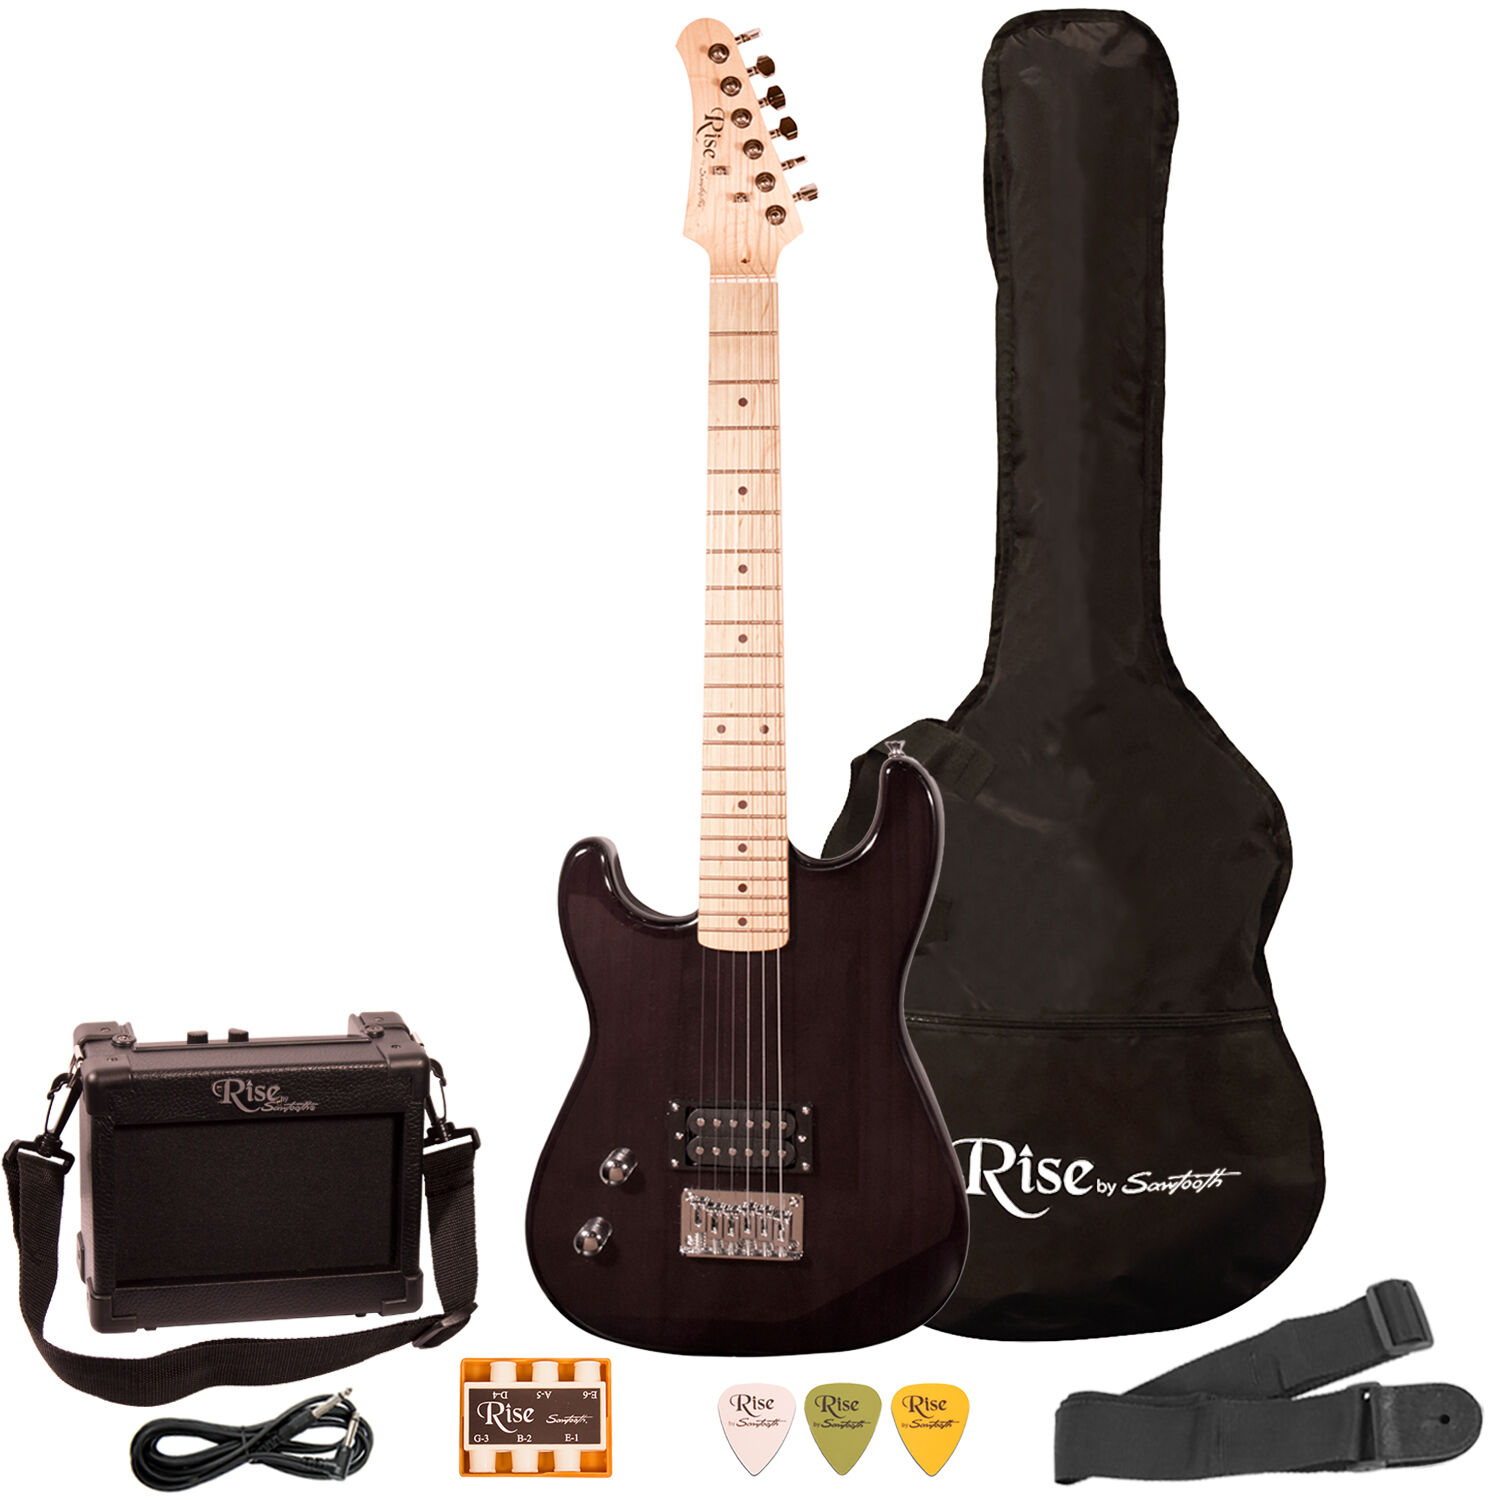 Model:Left Handed Full Size Guitar, Black:Rise by Sawtooth Beginner Electric Guitar Kit with Amp & Accessories